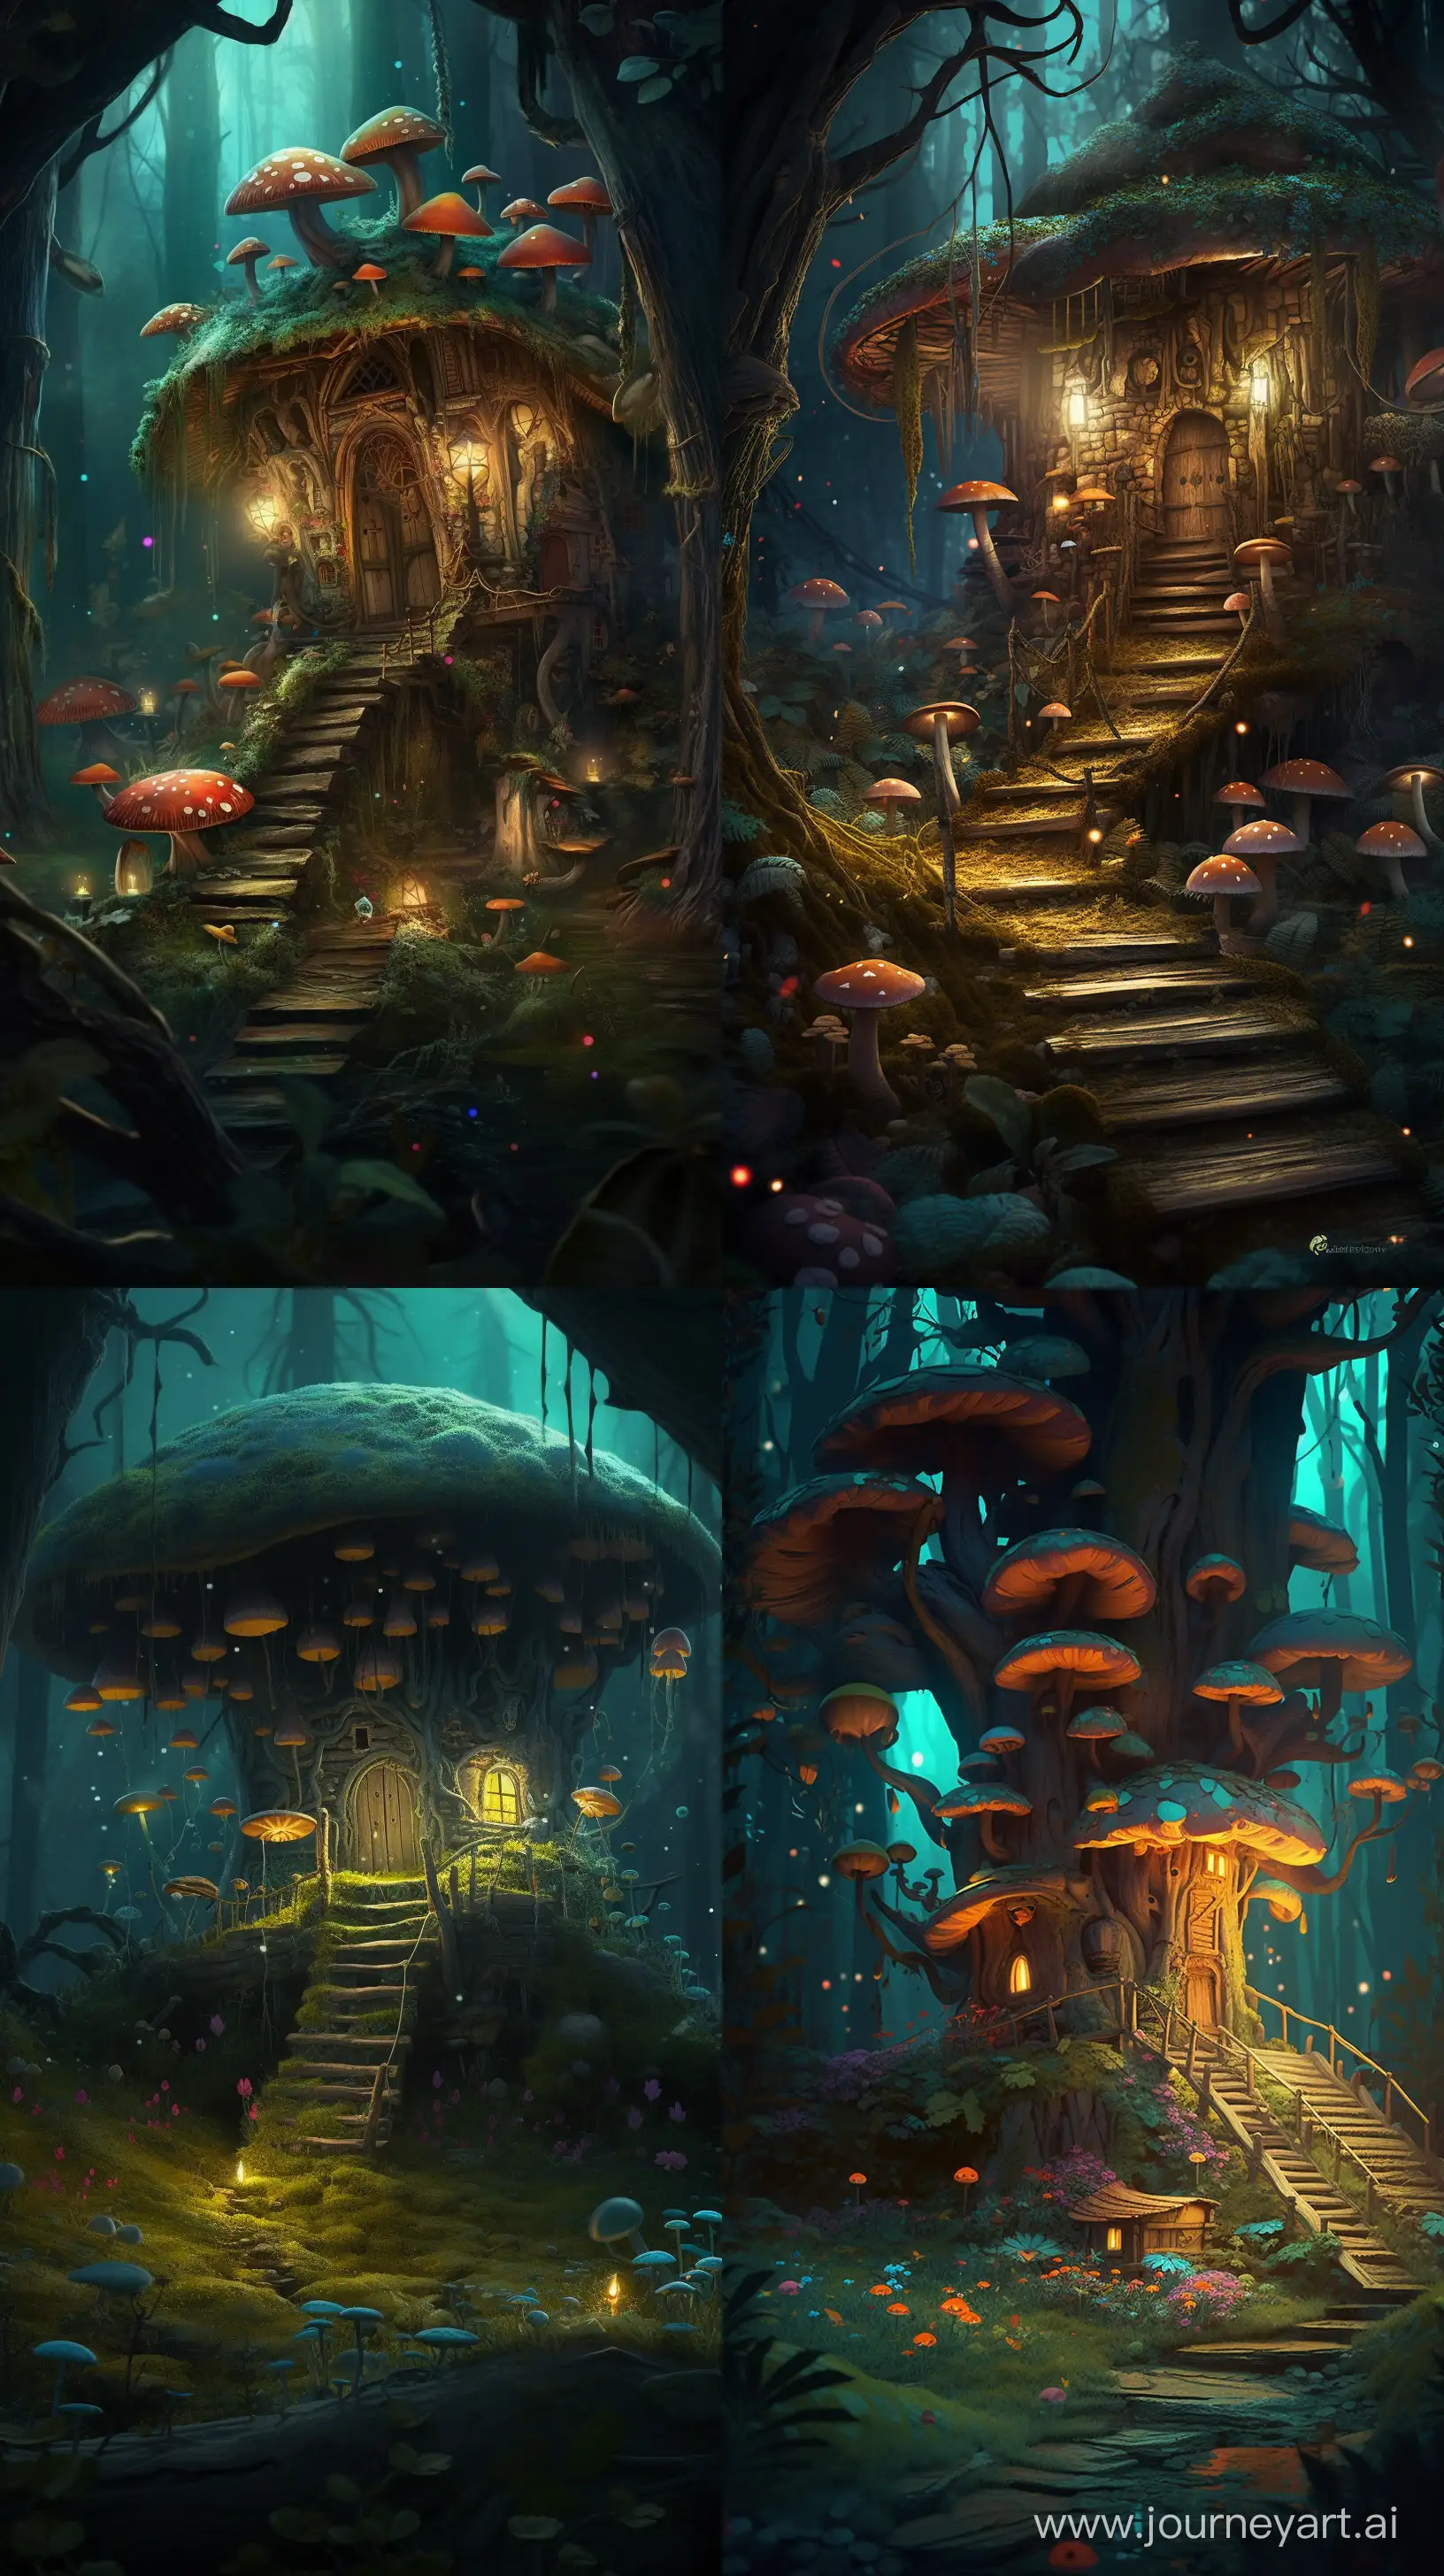 A magical forest dwelling hidden beneath a thick canopy of ancient trees, the house constructed with moss-covered stones and wooden beams, surrounded by fireflies and illuminated mushrooms, Illustration, create a digital artwork with vibrant colors to evoke a sense of enchantment and wonder, --ar 9:16 --v 5